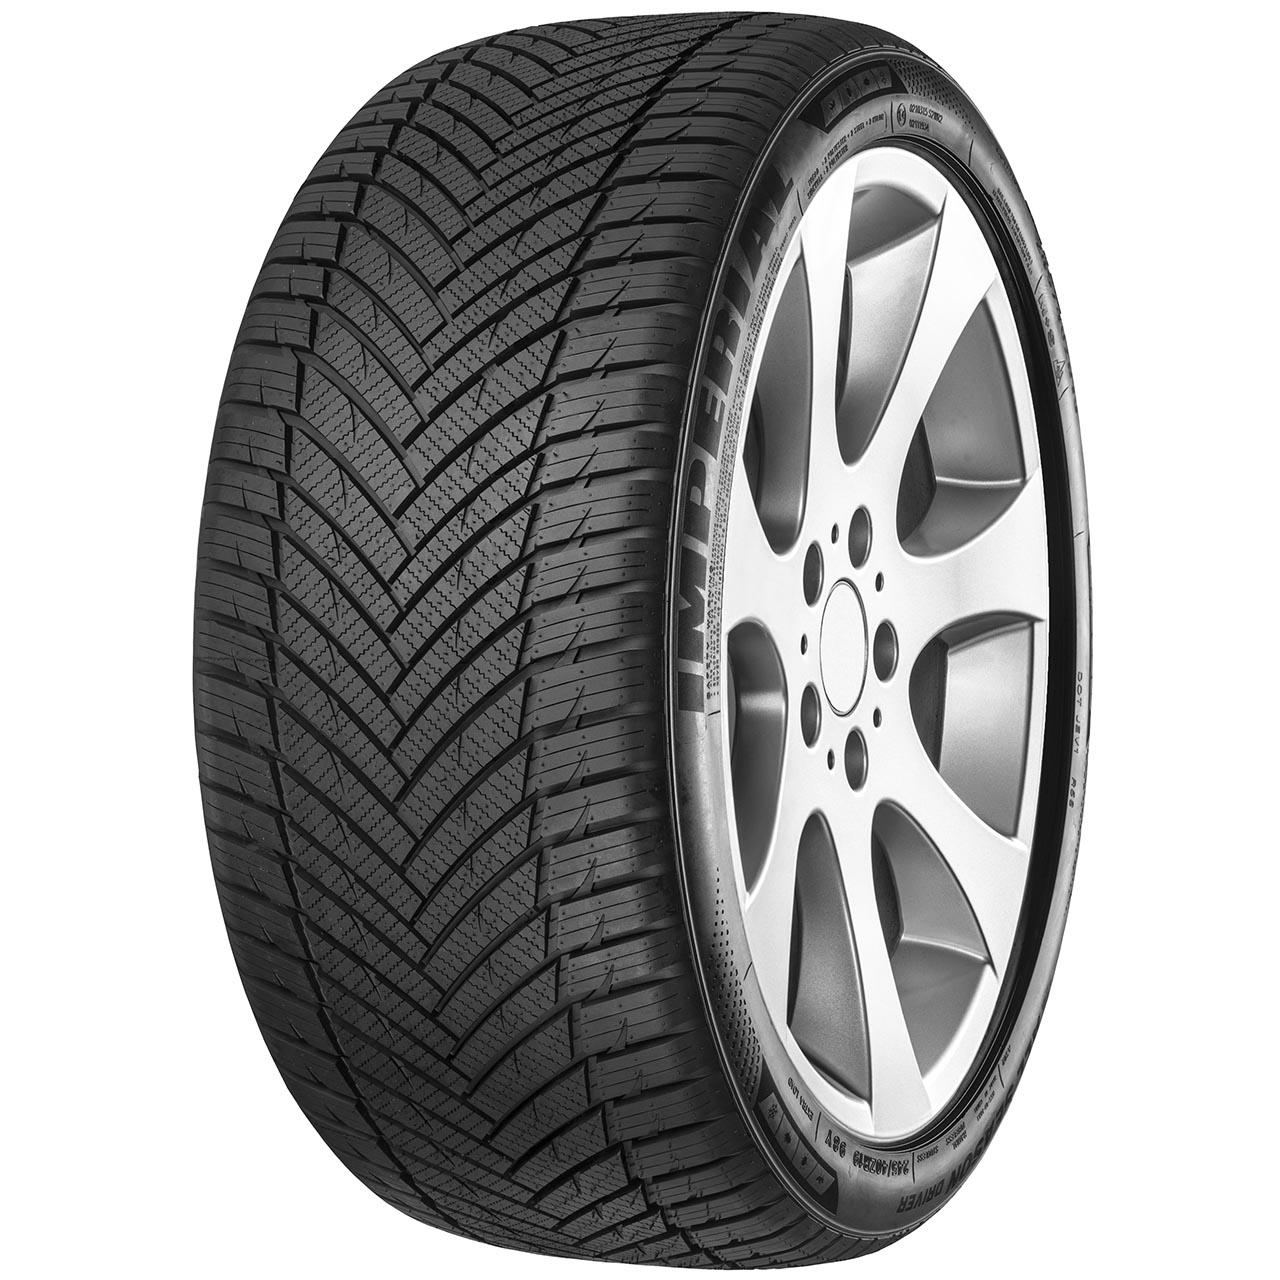 Imperial AS Driver 155/80R13 79T